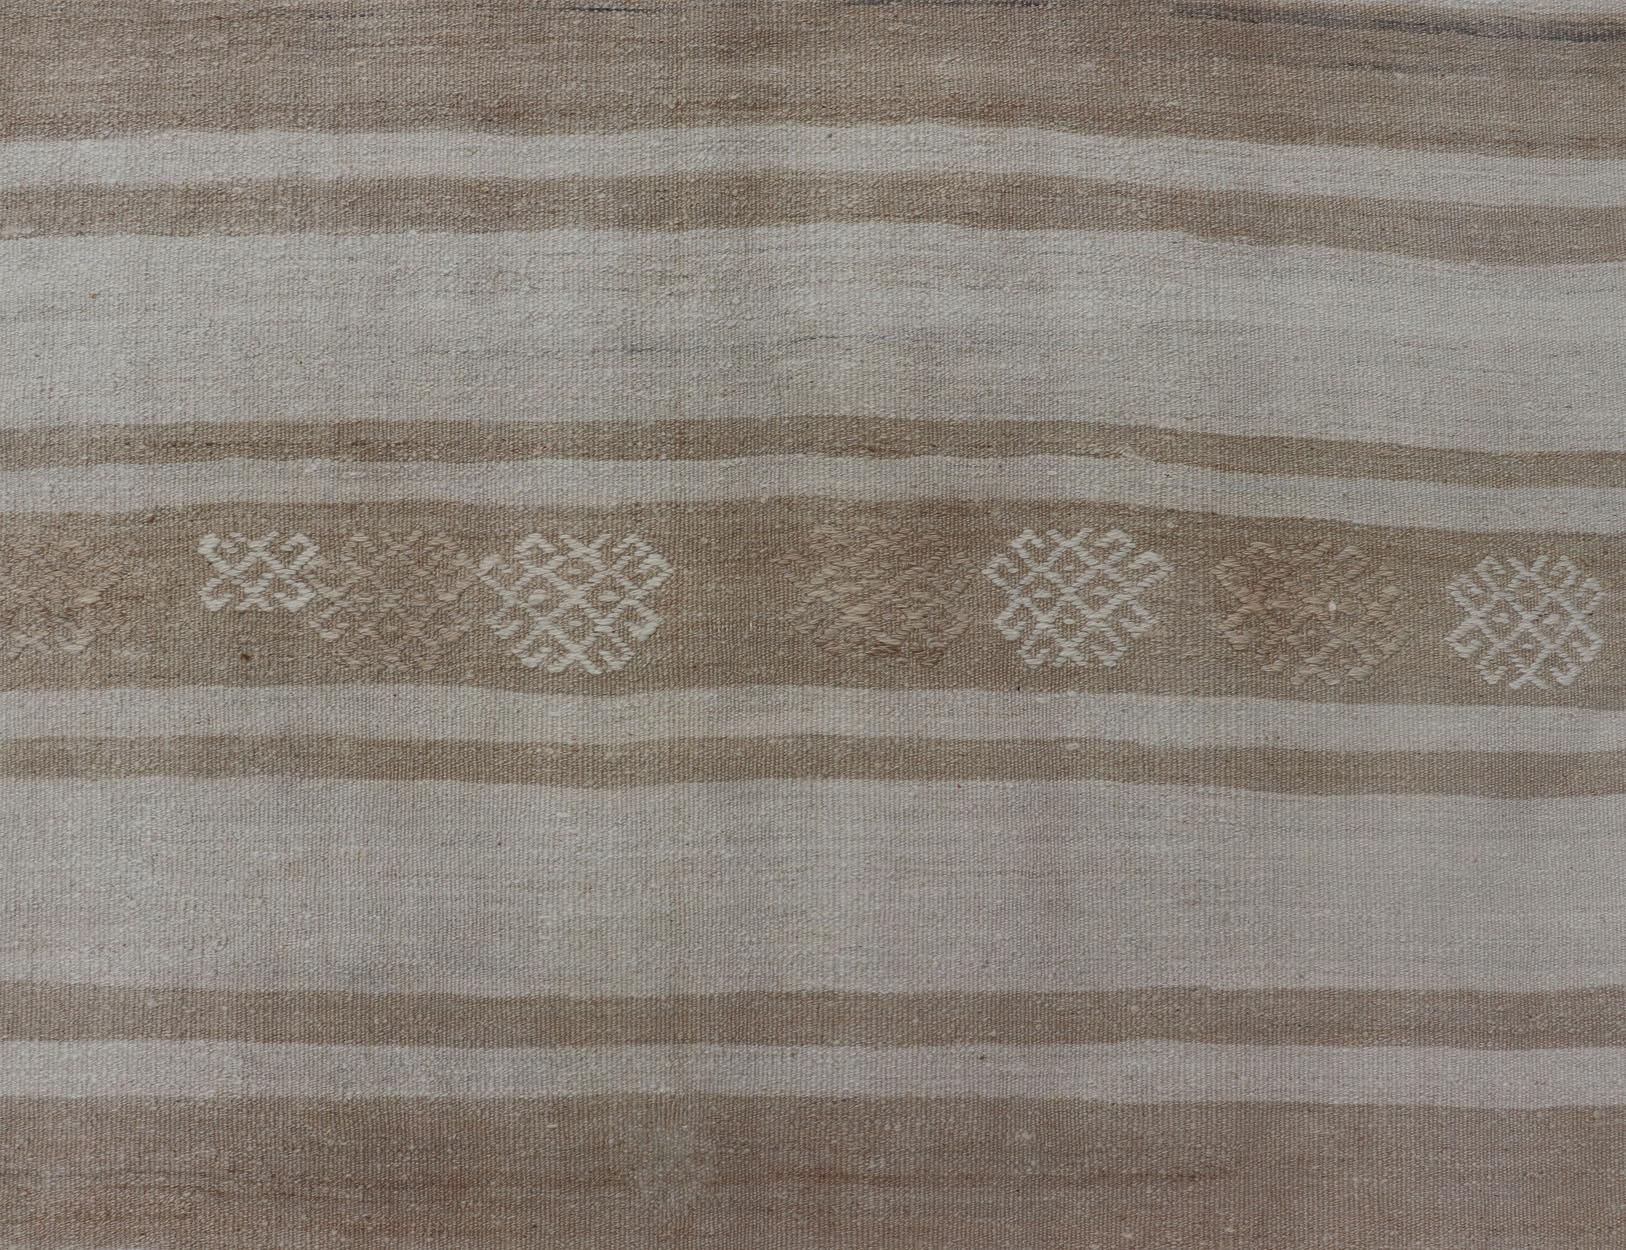 Square Flat-Weave Kilim Vintage Rug from Turkey with Horizontal Stripes in Taupe For Sale 1